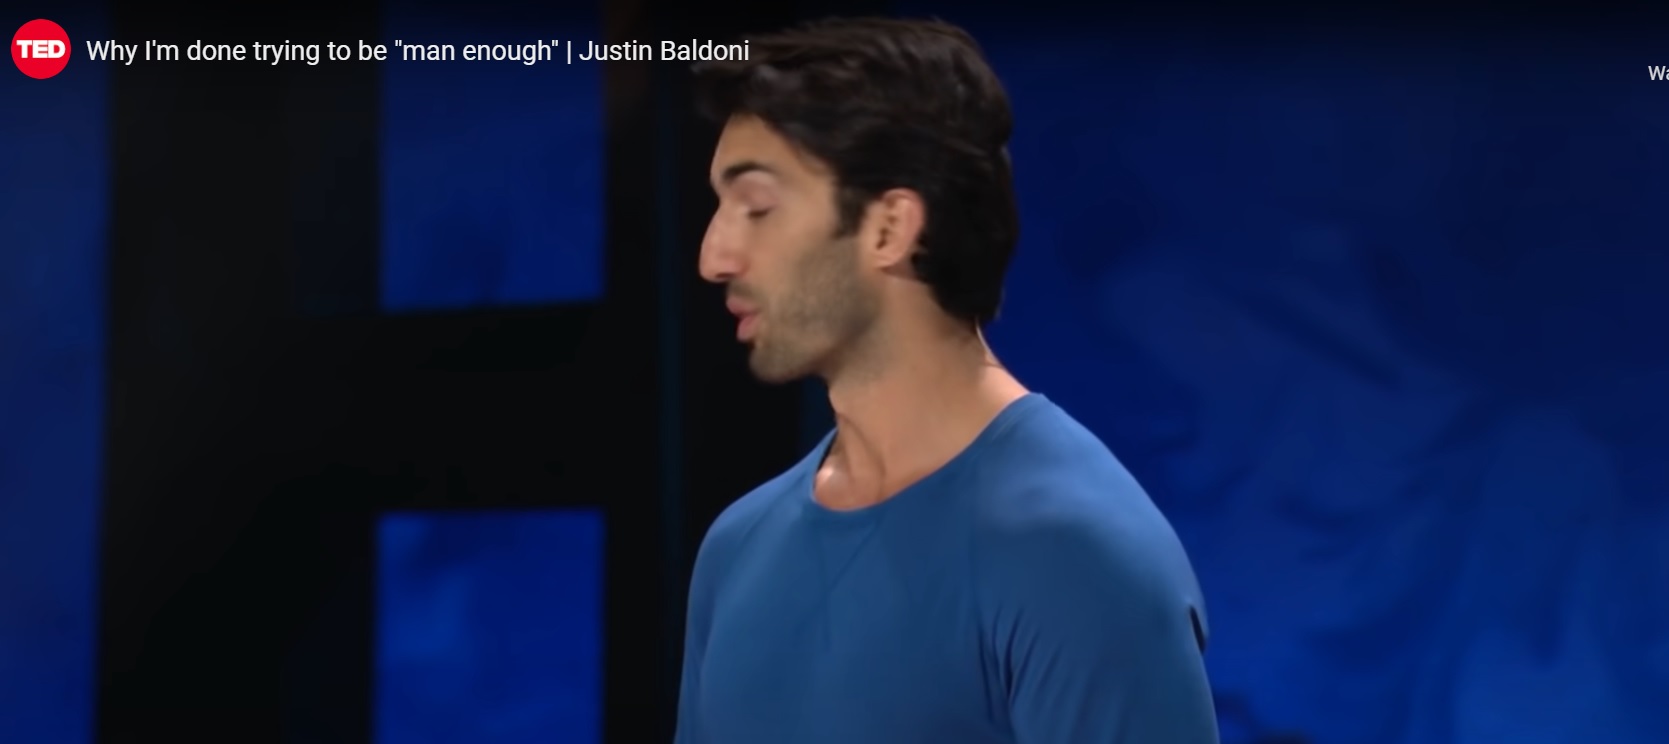 Why I’m done trying to be “man enough” | Justin Baldoni